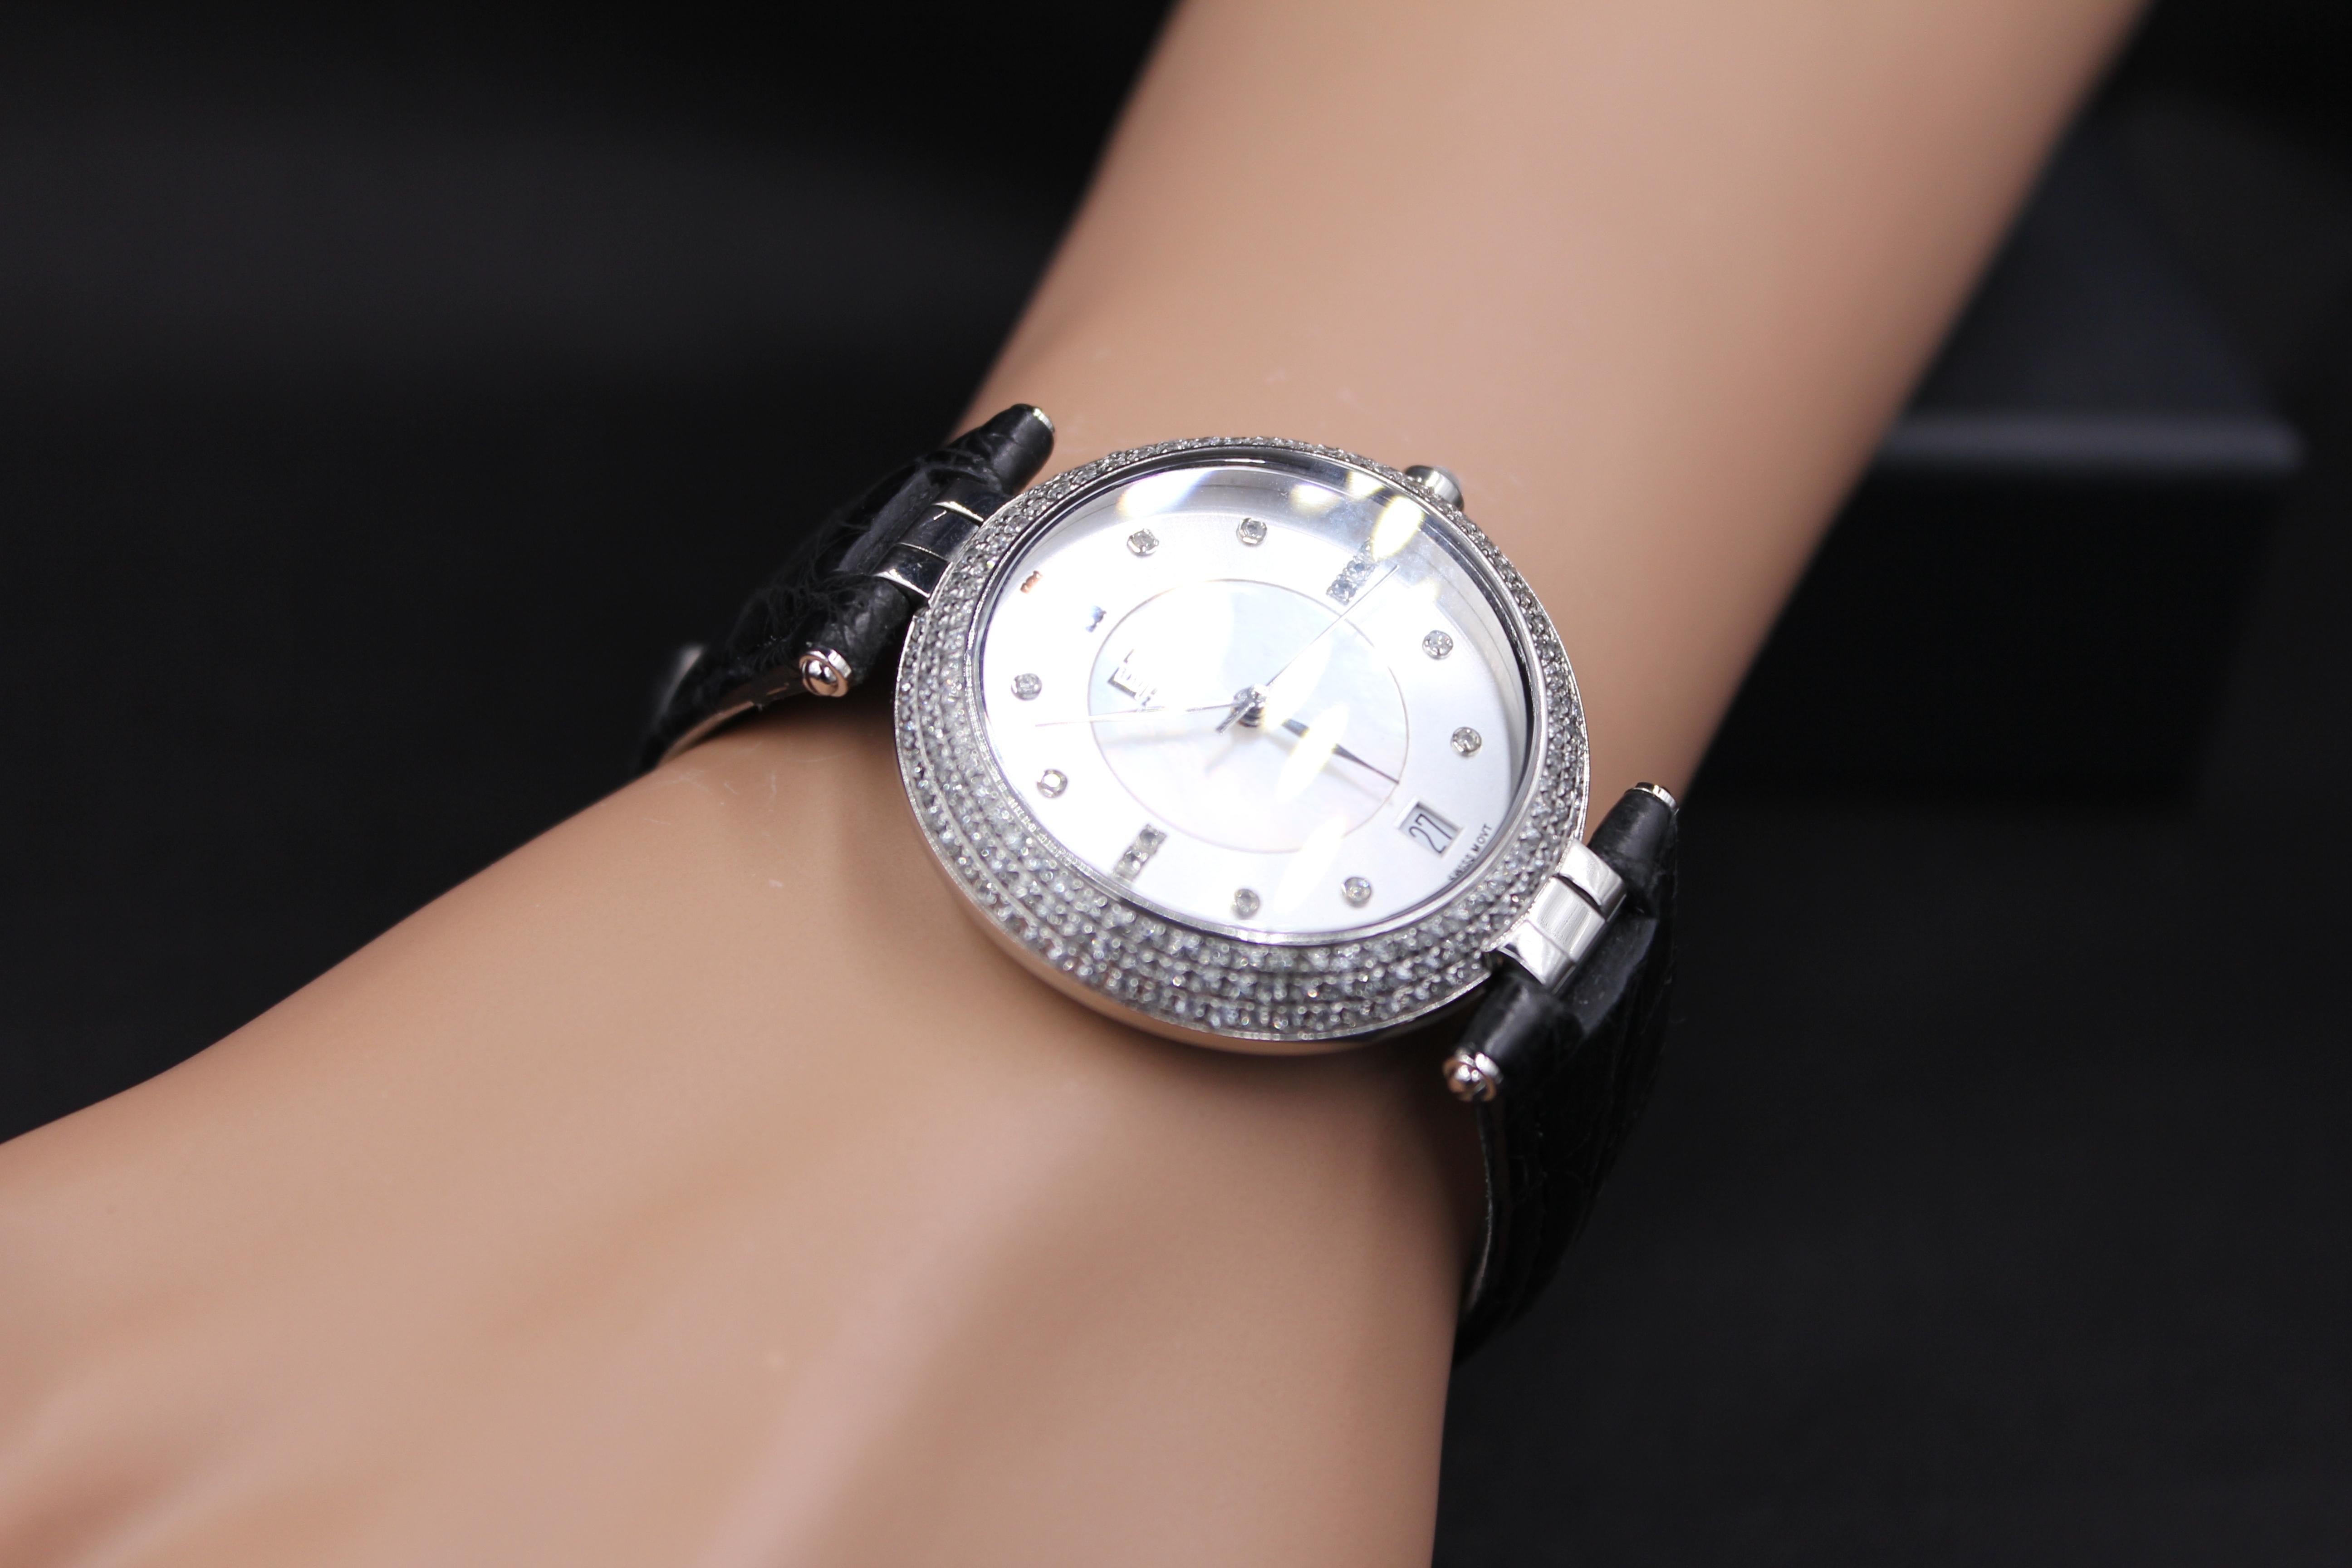 · ·         Quality Swiss-Quartz movement guarantees precision timing
·         Mother-of-Pearl dial micro-paved with diamonds and gemstones enhances any dress style
·         Scratch-resistant sapphire glass lens
·         Genuine exotic crocodile